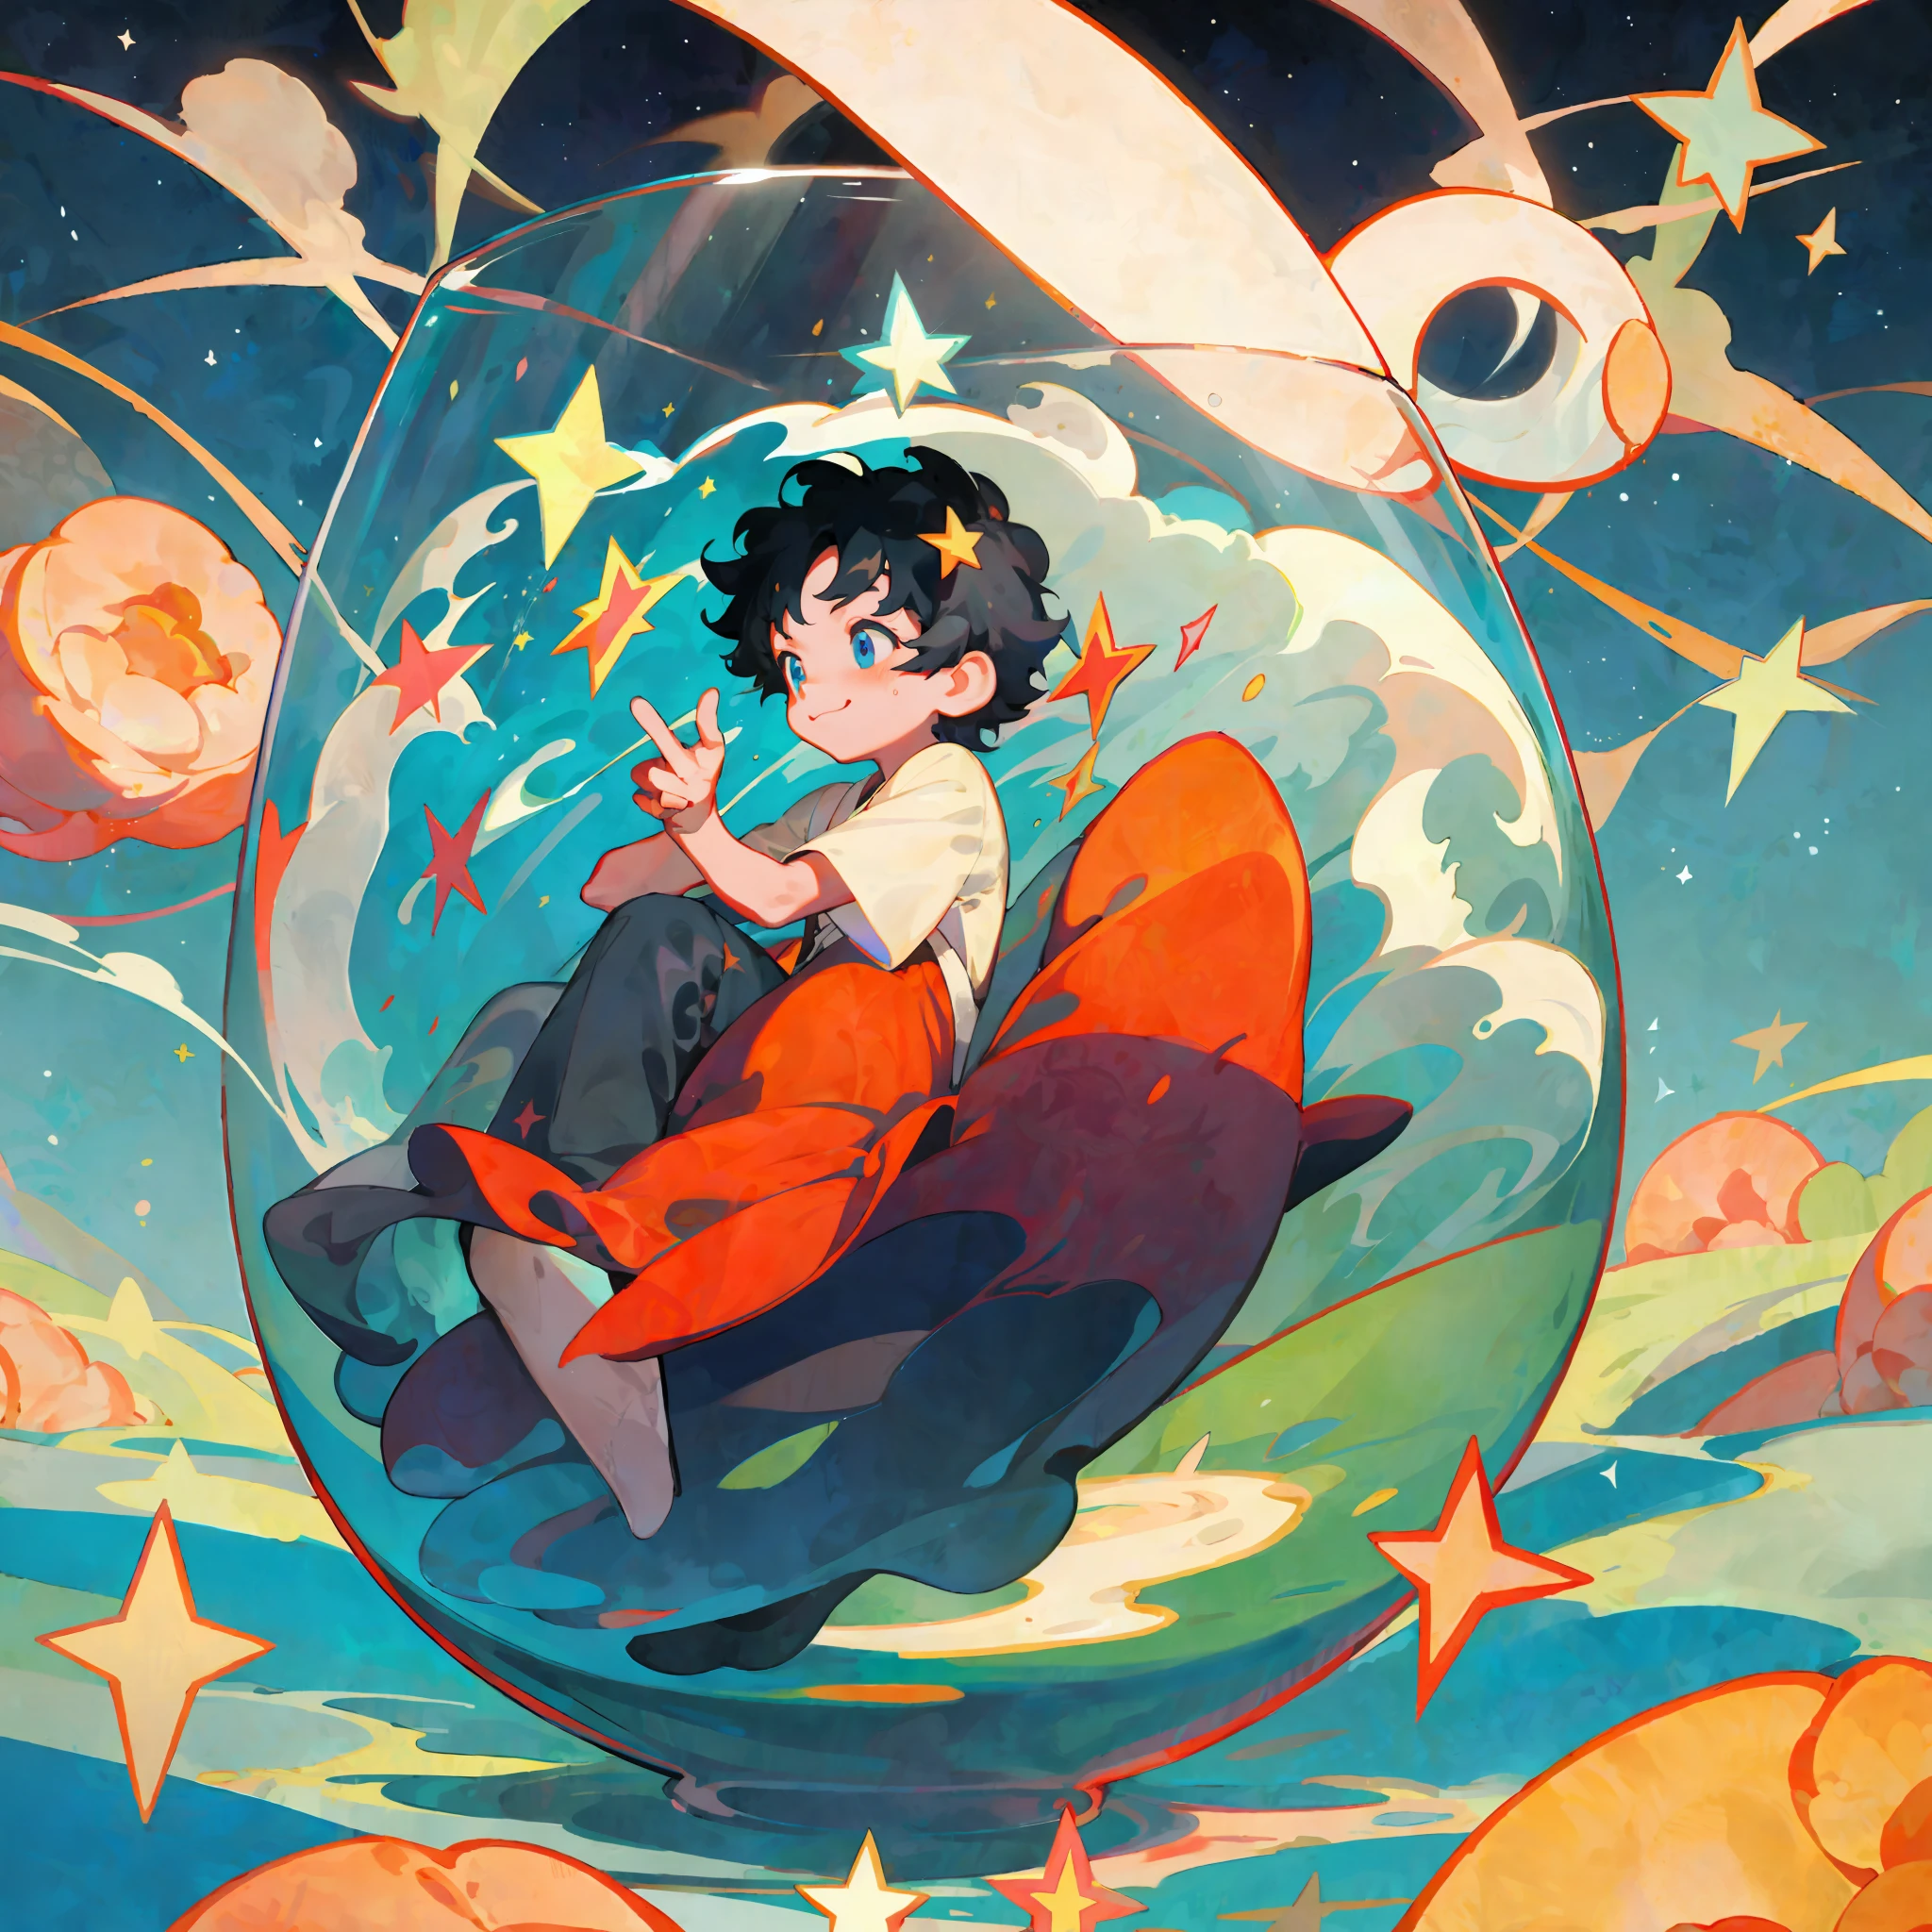 Asian face, a little boy sitting inside a glass, black hair, happy, fantastical, sunny, shaded, colorful, stars